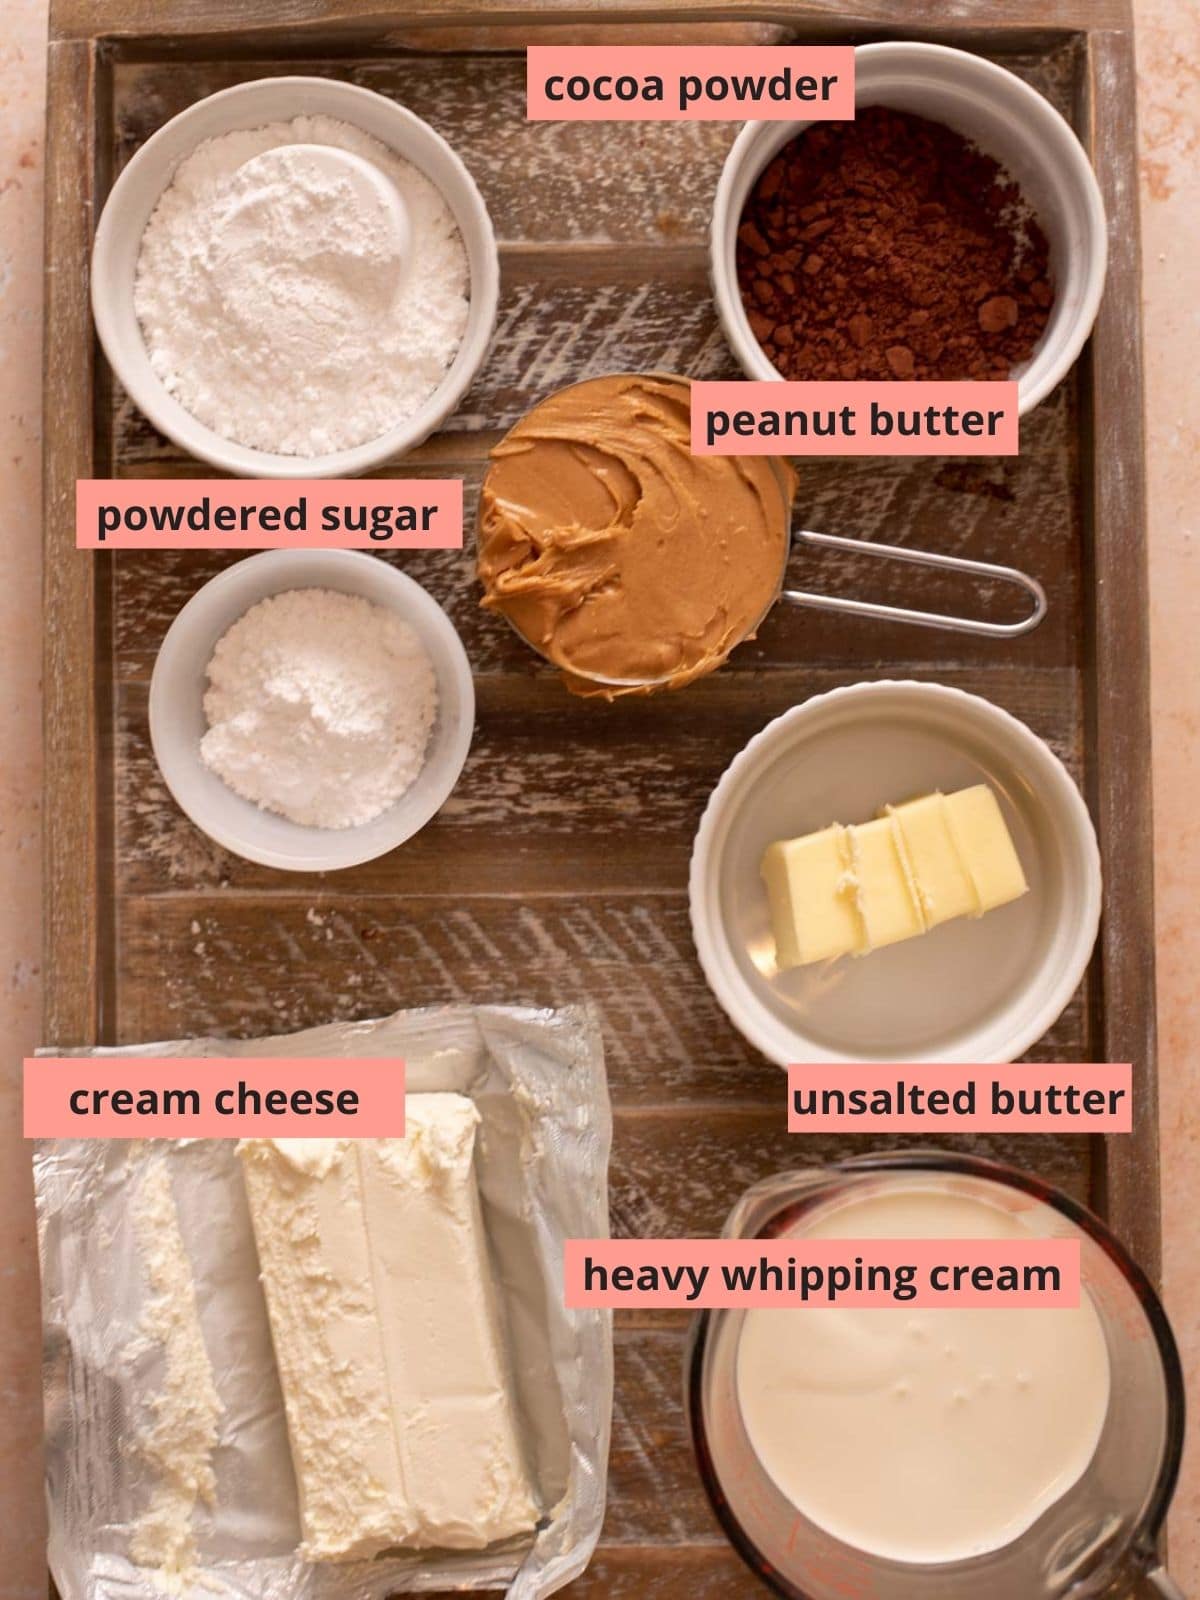 Labeled ingredients used to make peanut butter pie